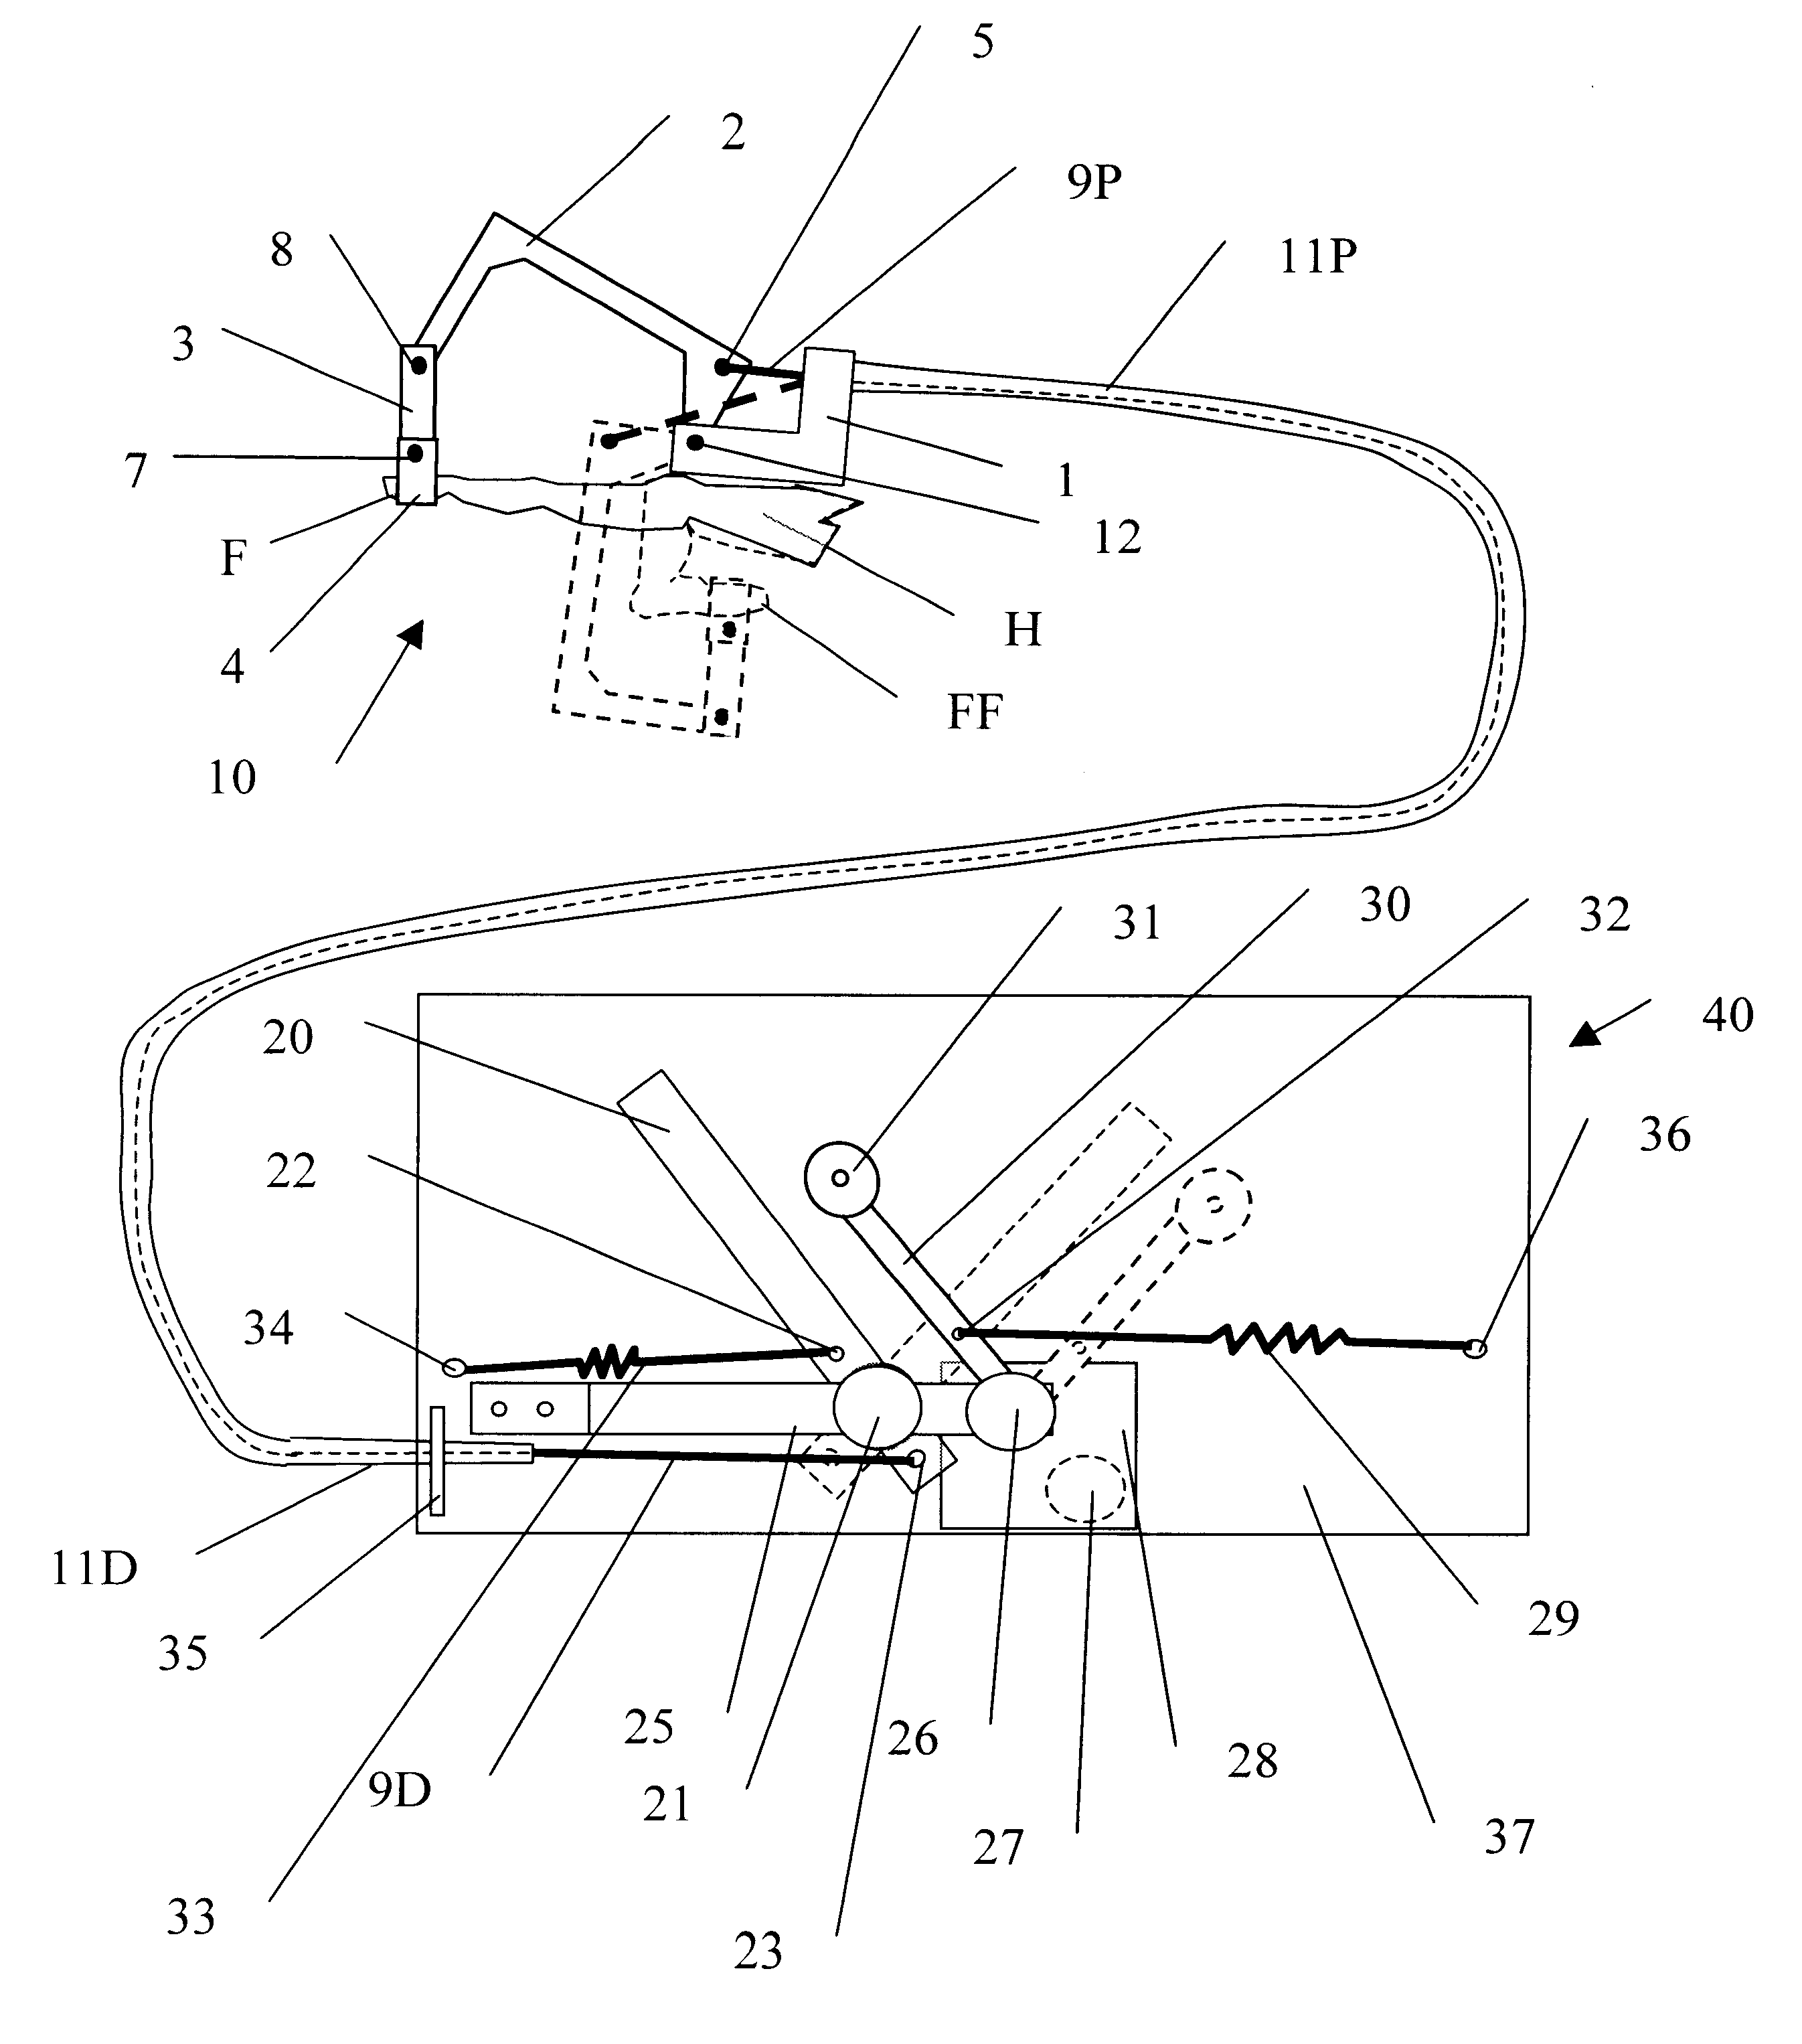 Force display master interface device for teleoperation